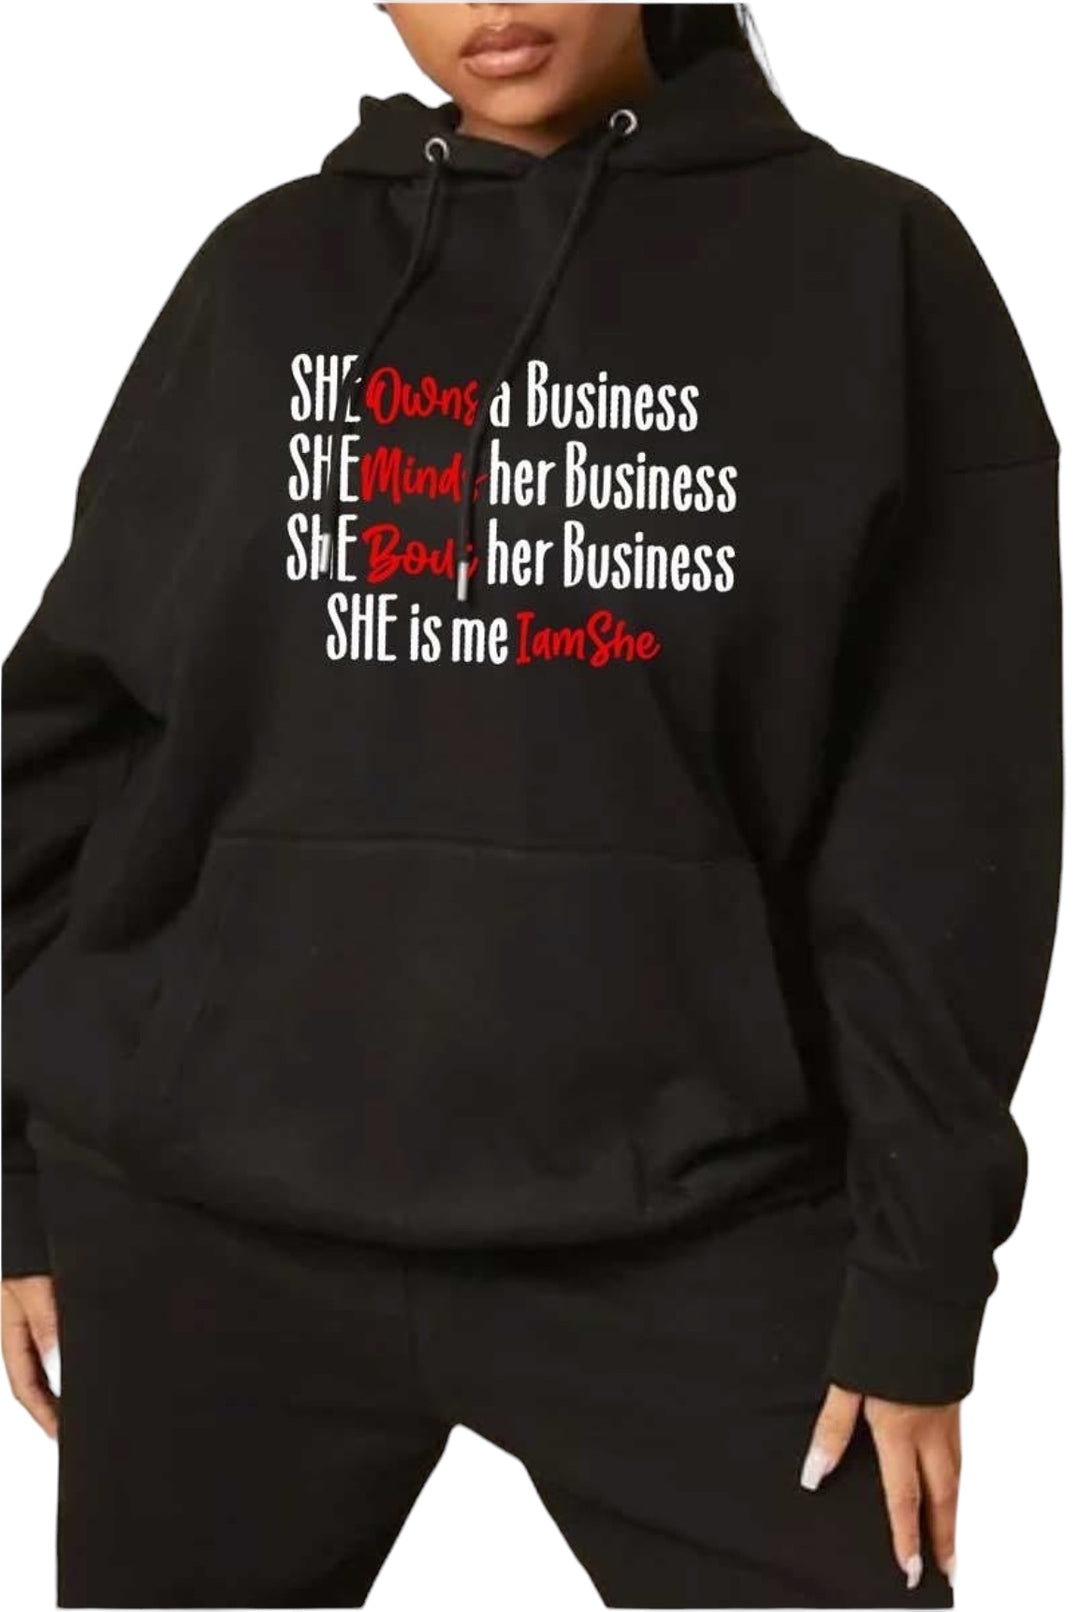 She Owns/Minds/Bout Her Business She is Me I am She Hoodie  {Unisex}